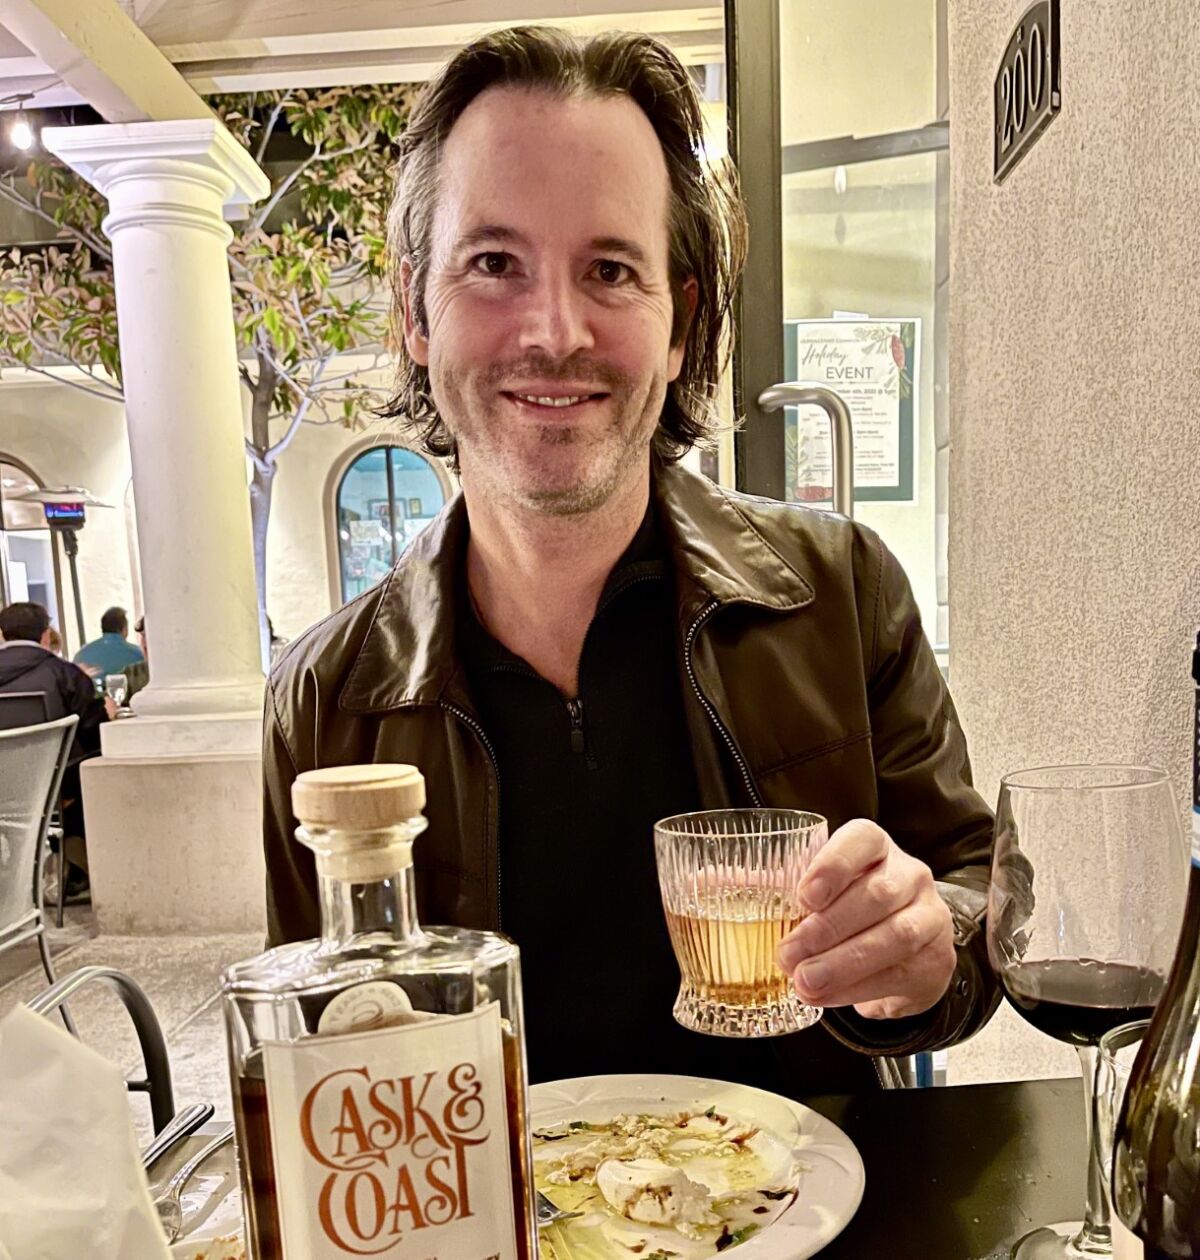 Former San Diego City Councilman Mark Kersey has a new line of work — making bourbon as CEO of Cask & Coast Spirits Co.